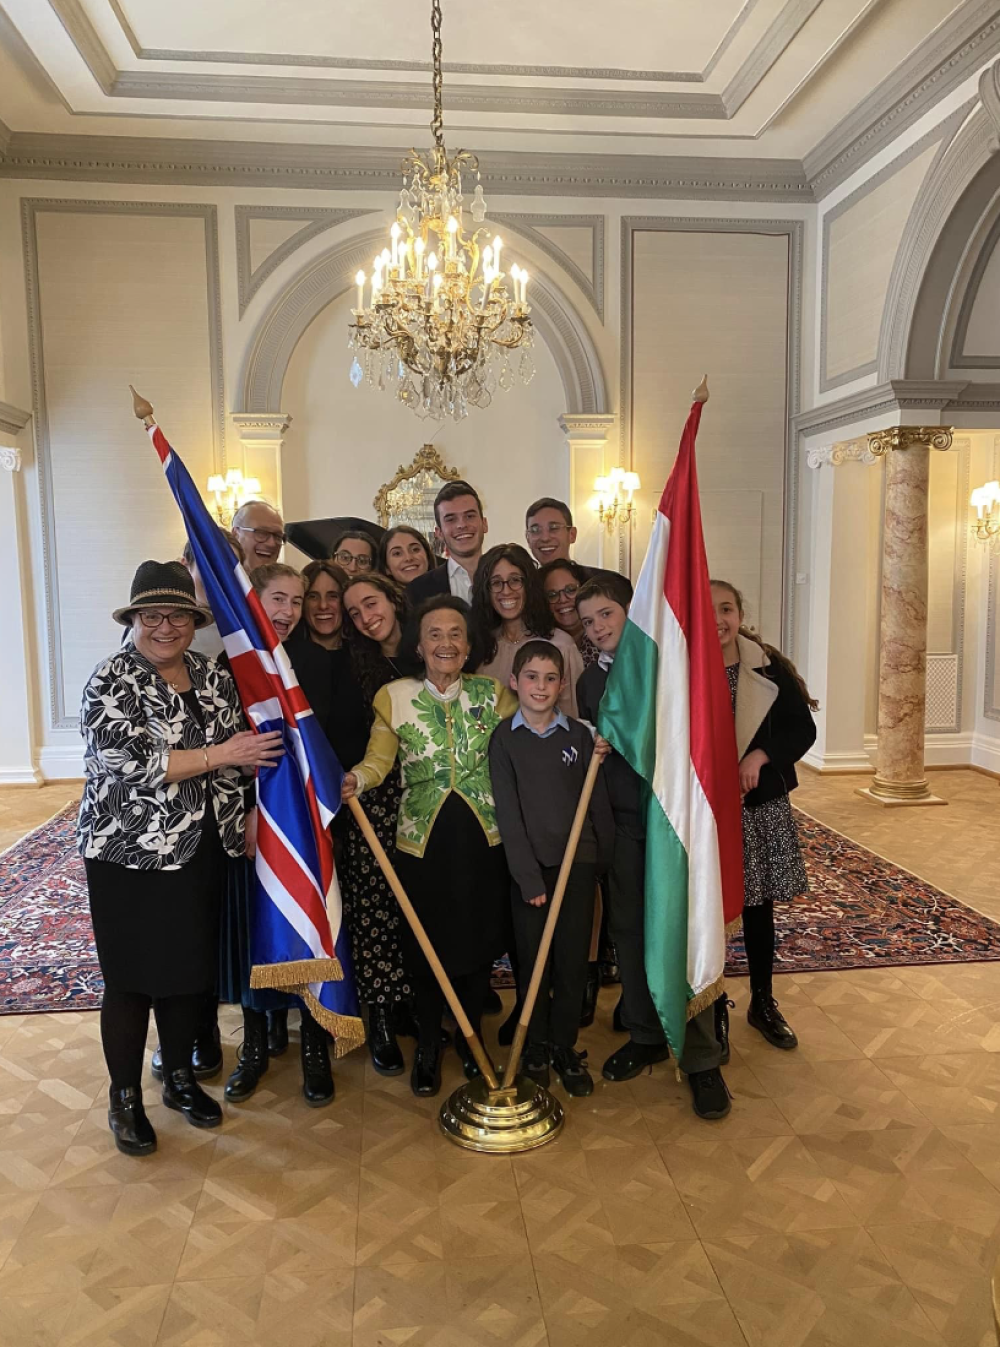 Lily Ebert, 98, was surrounded by her family as she was awarded the Knight’s Cross of the Hungarian Order of Merit on Tuesday for her work on educating people about the Holocaust (@DovForman/PA)